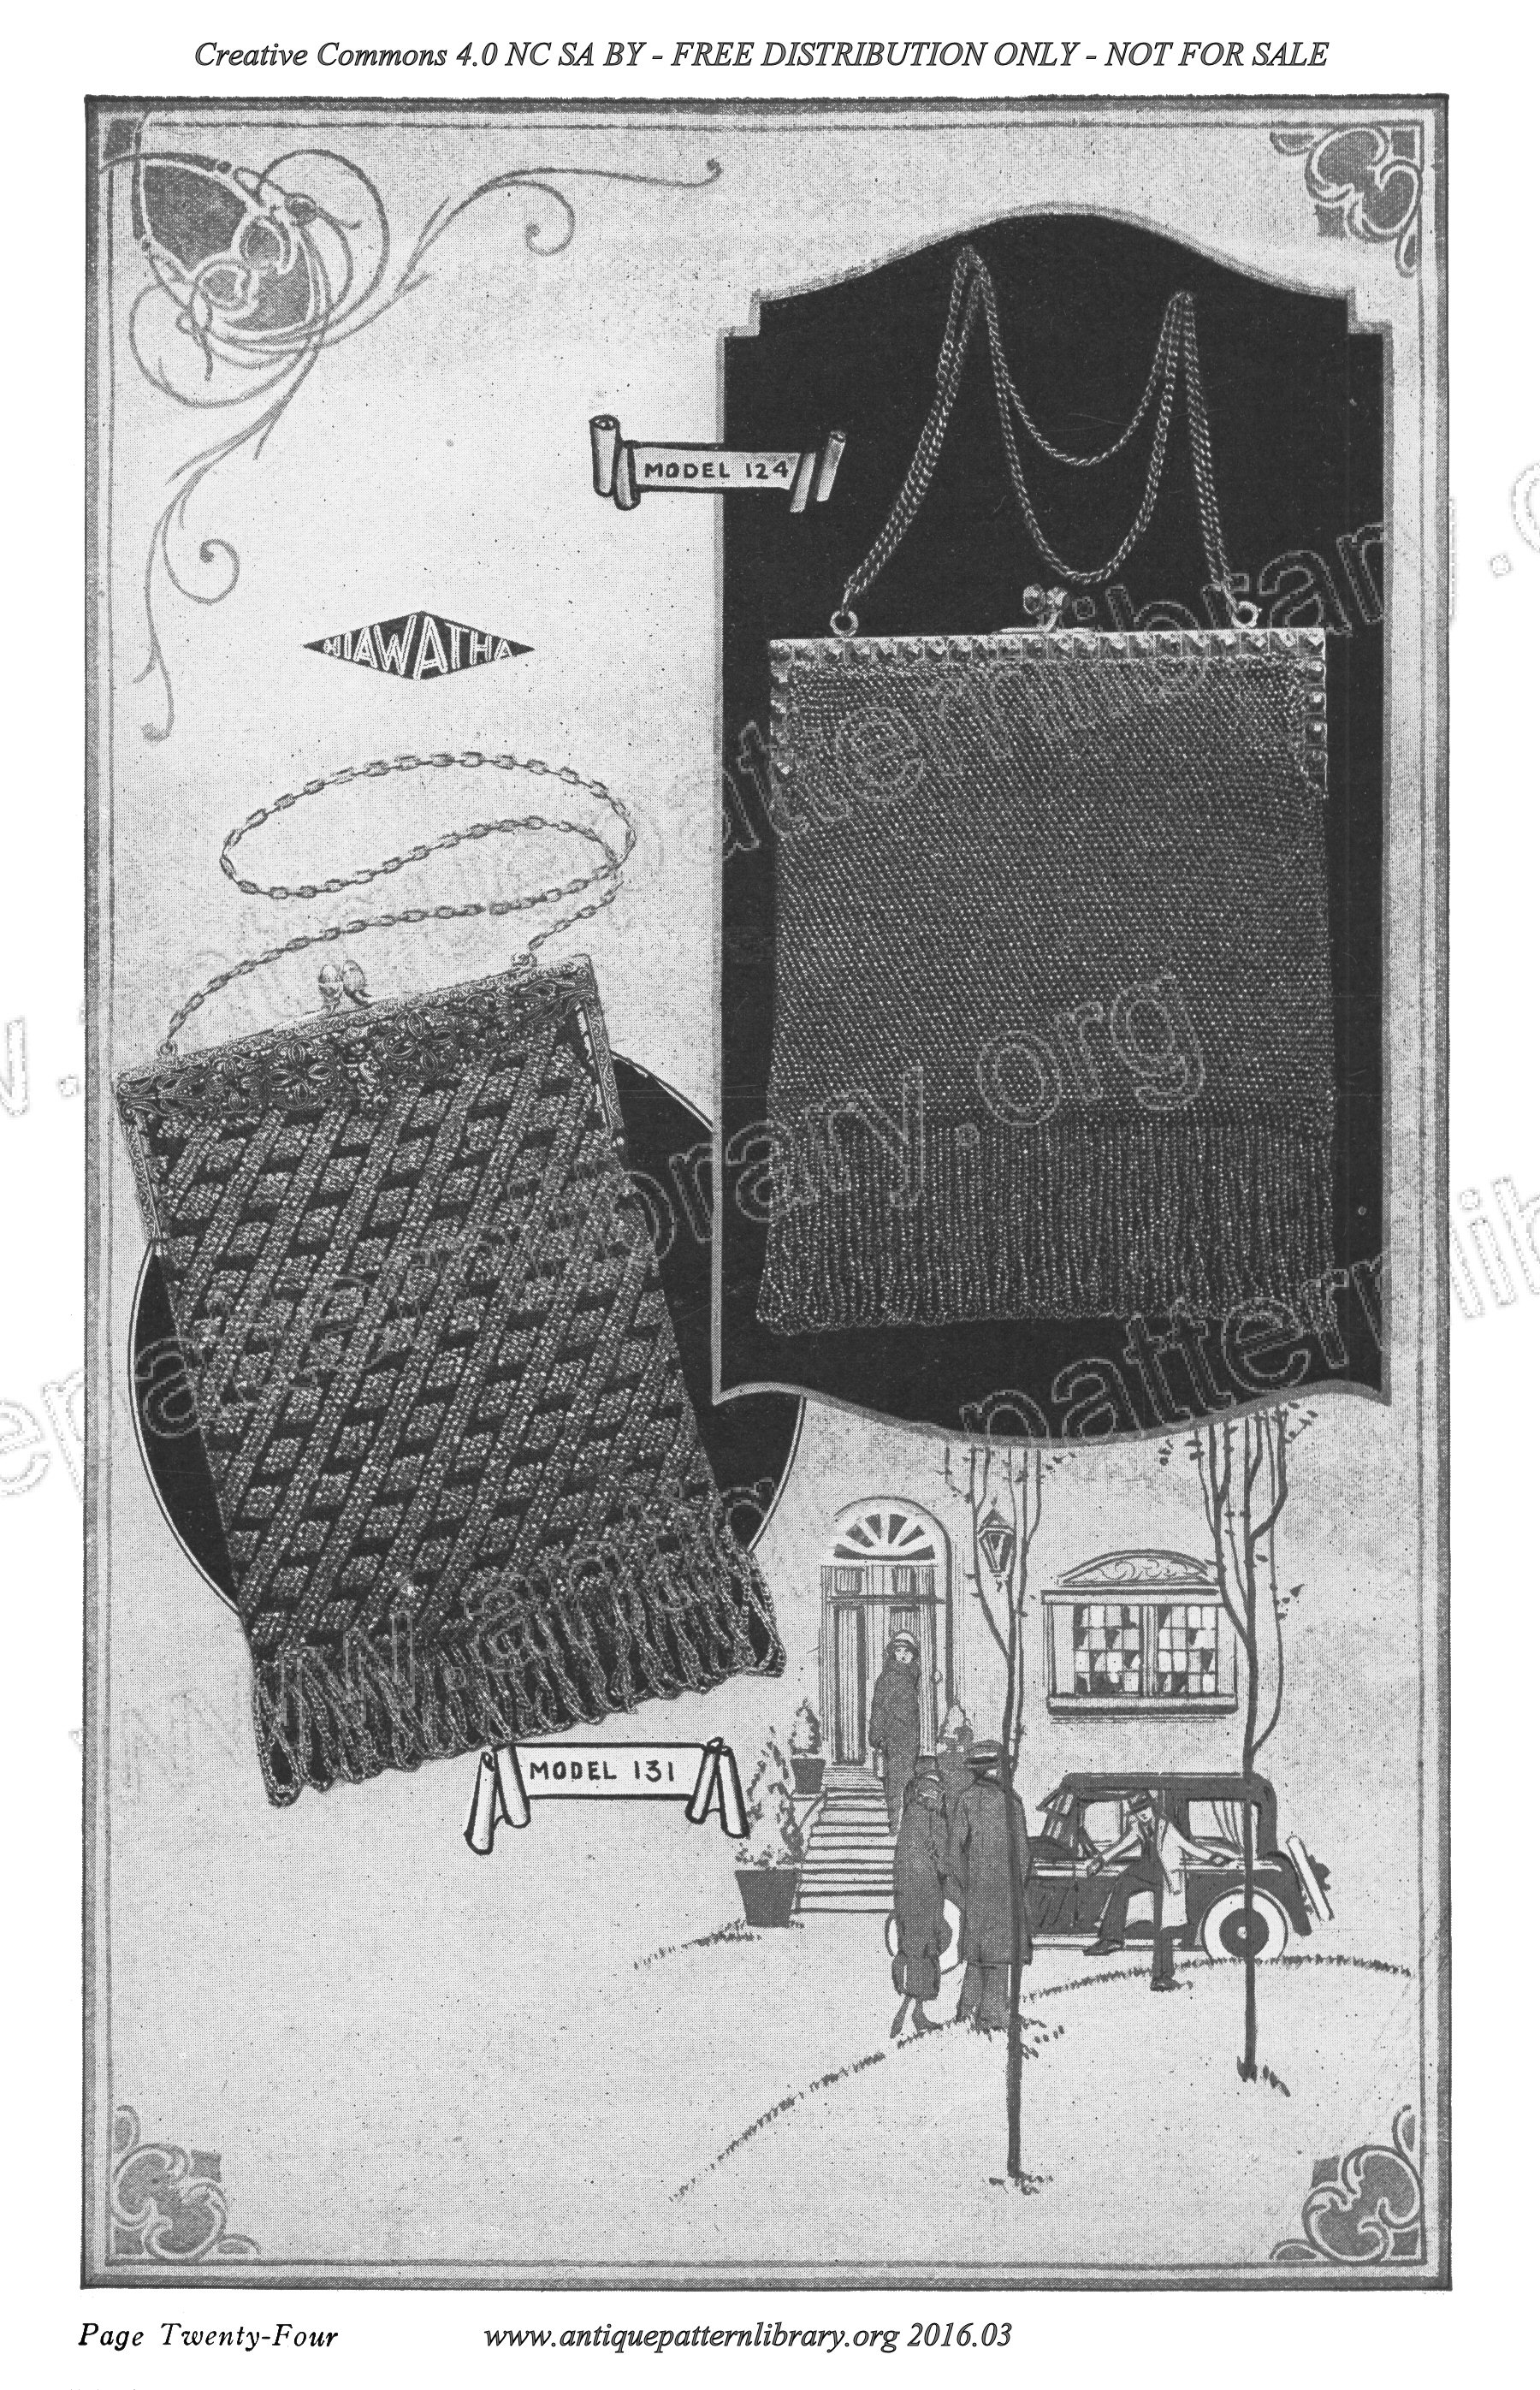 D-SW014 The Hiawatha Book: how to Make the New Beaded Bags and Chains, Edition No. VII